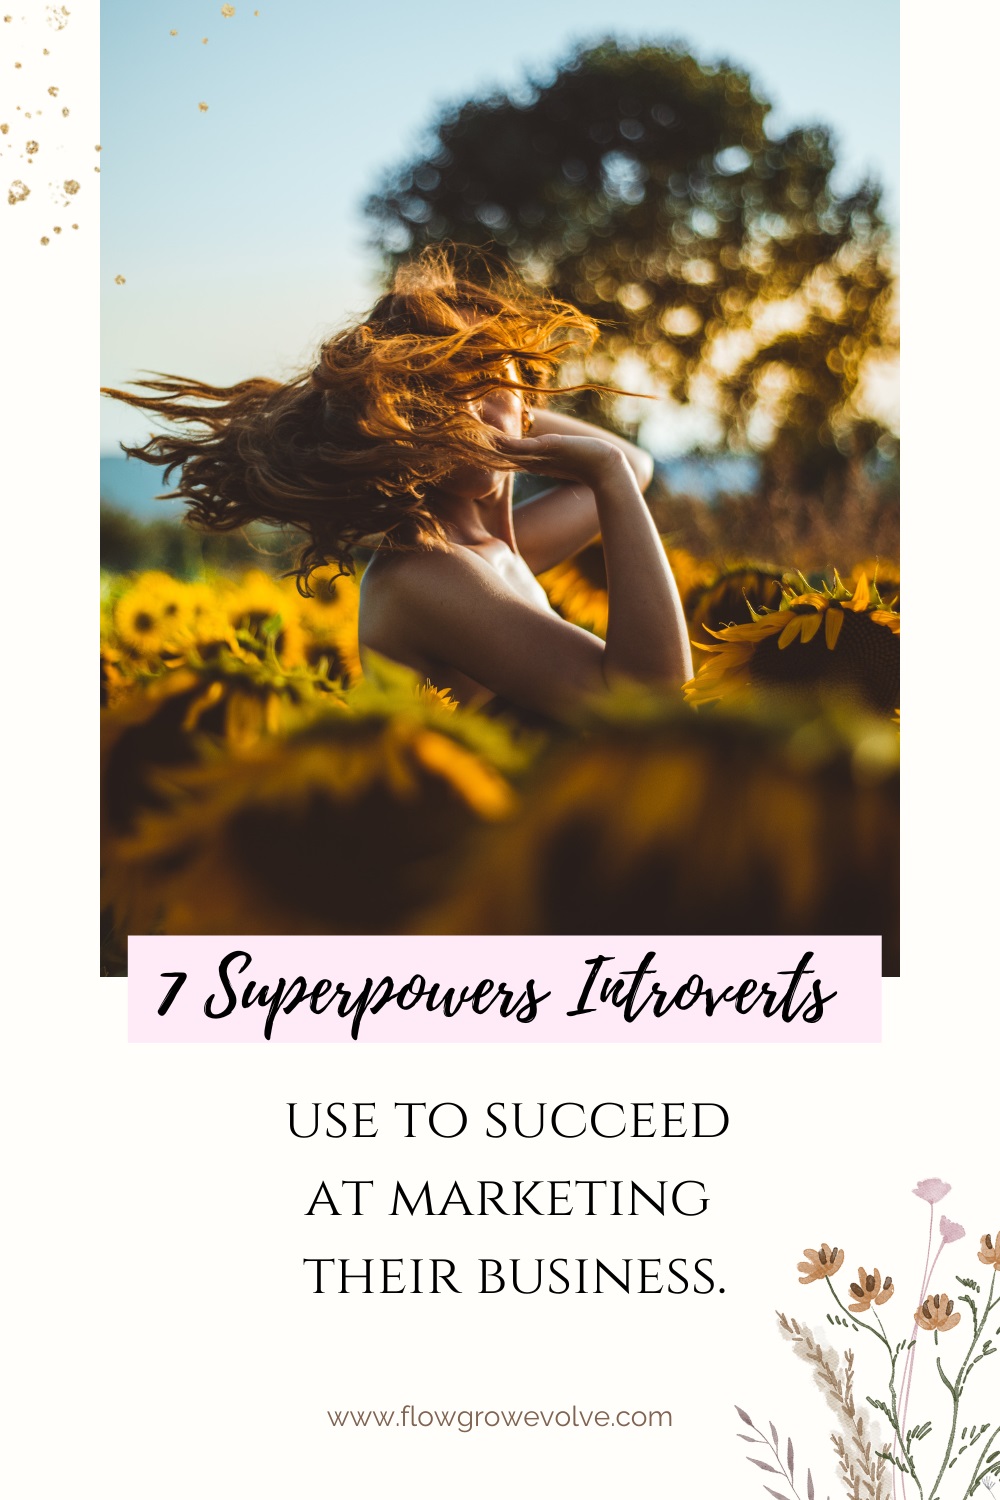 5 Superpowers that introverts use to succeed at marketing their small business. Pinterest post